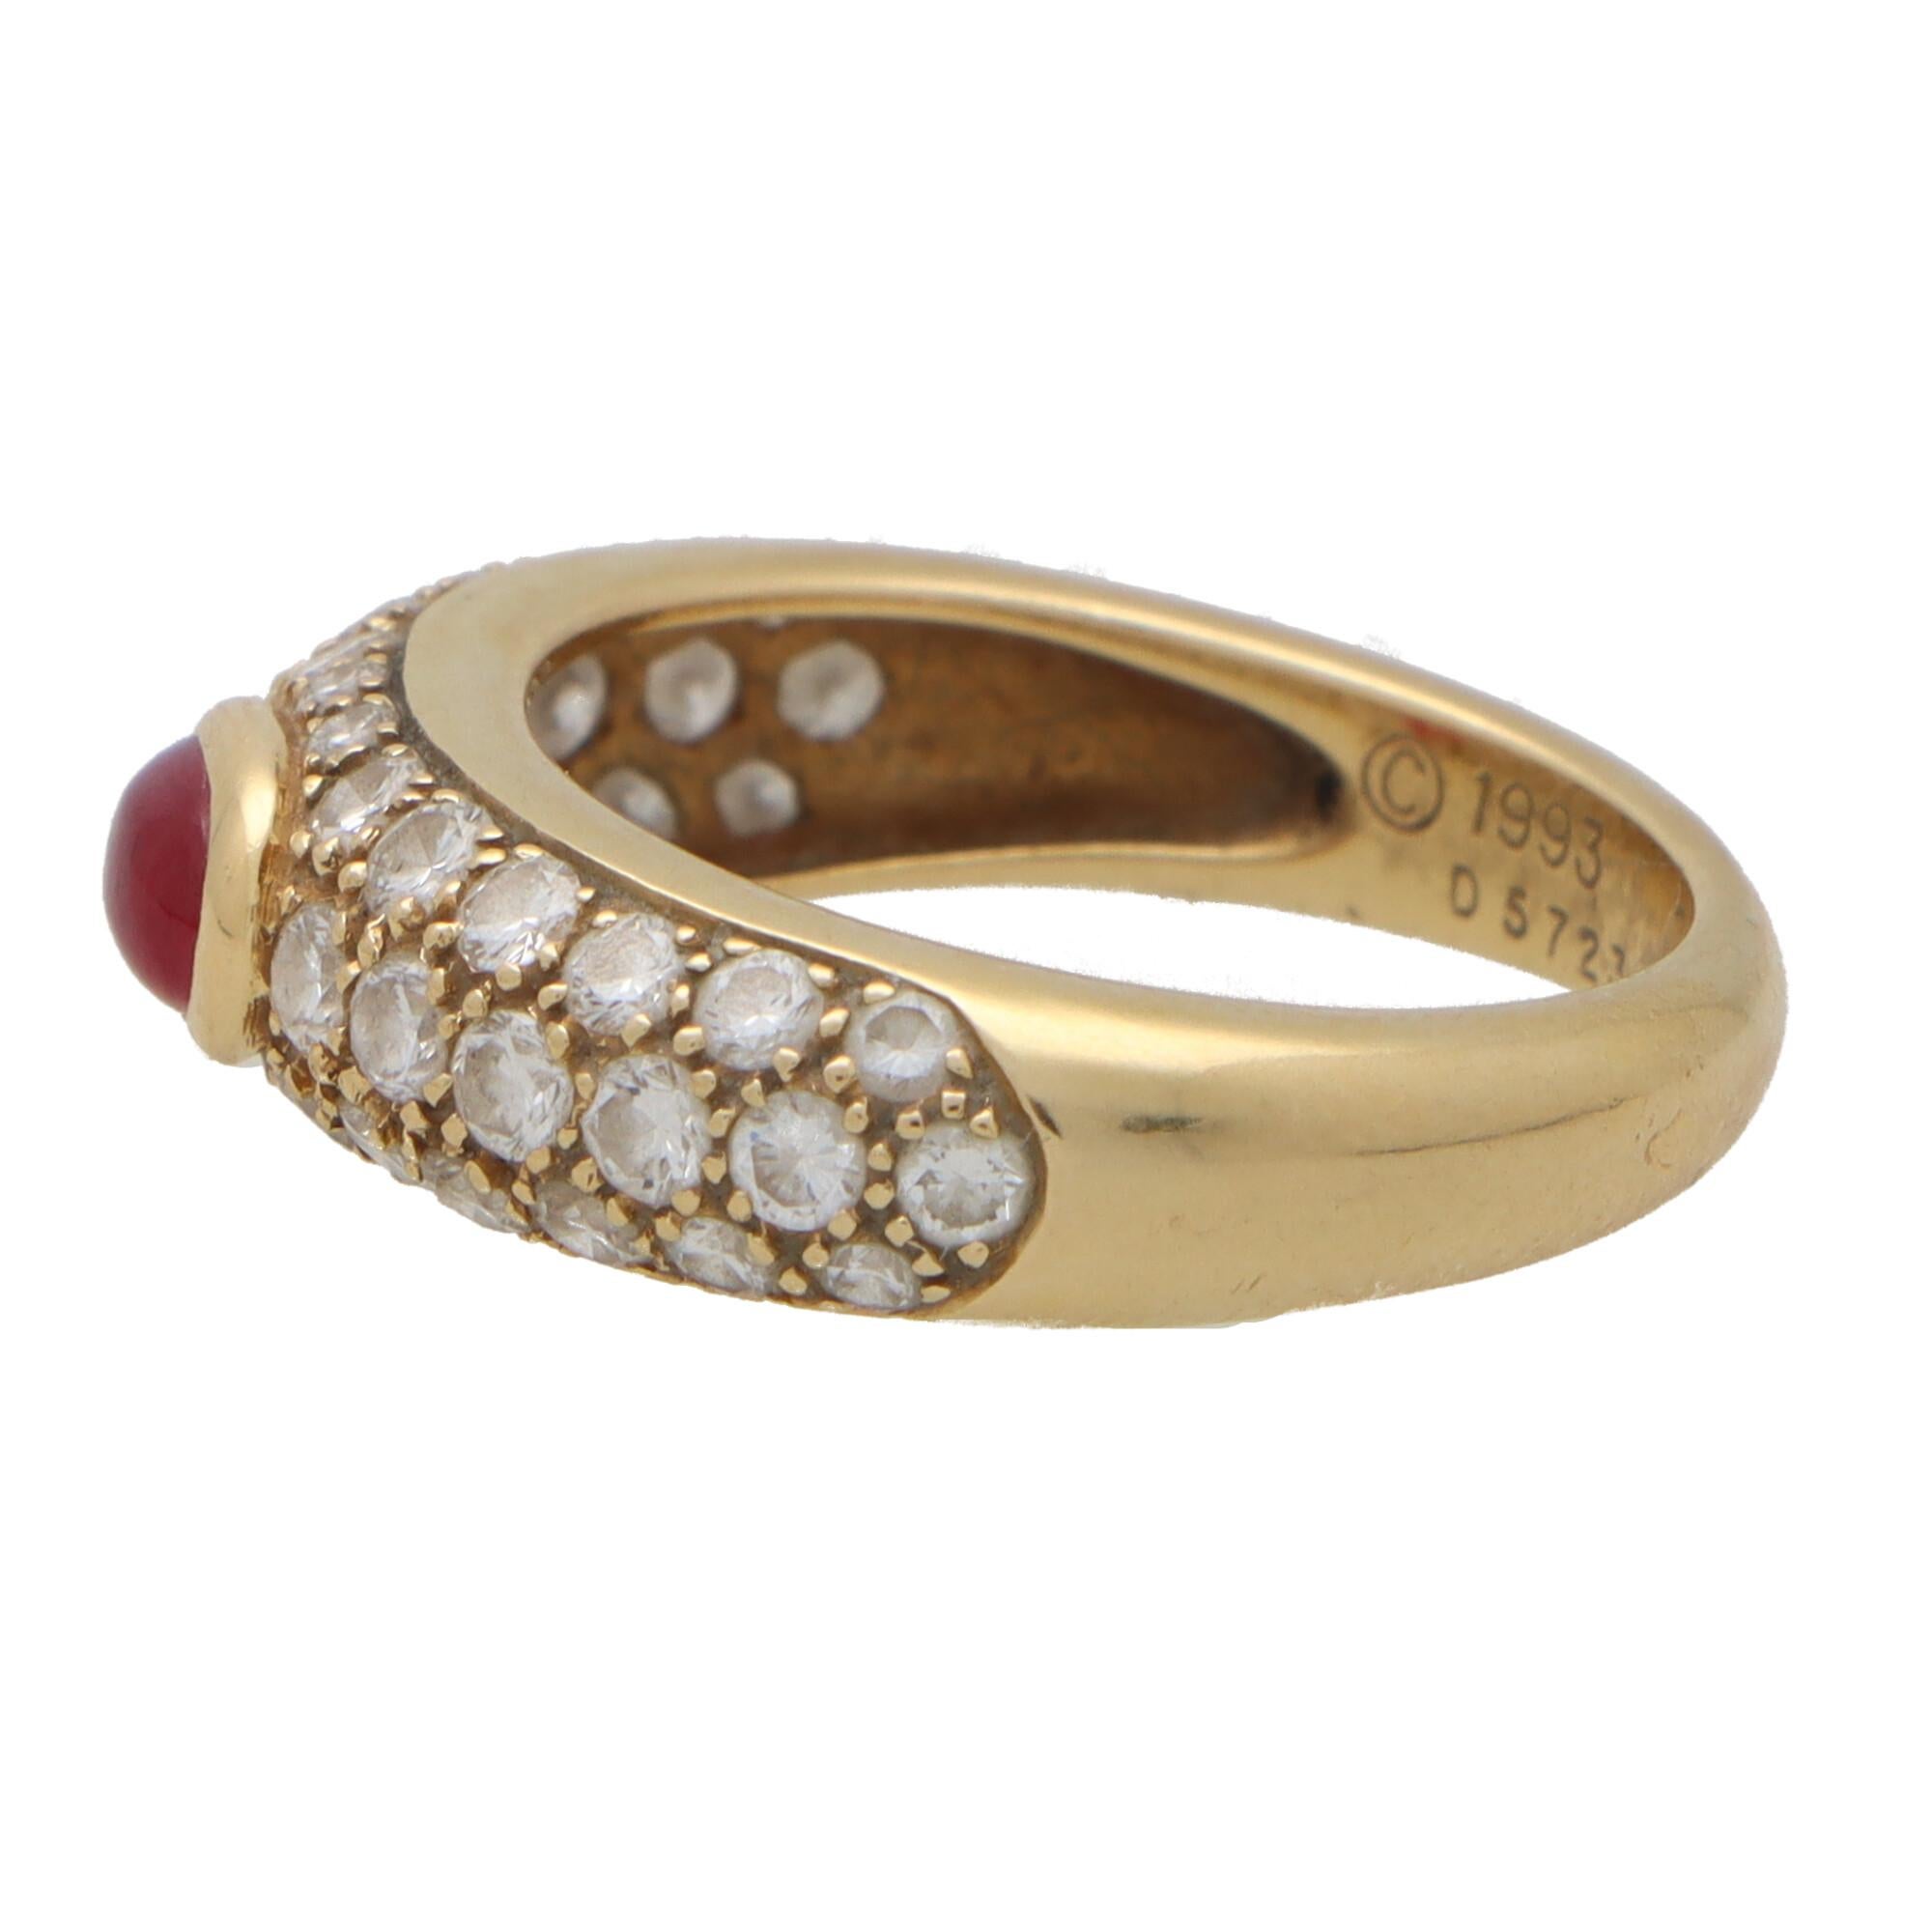 Retro Vintage Cartier Mimi Ruby and Diamond Ring in 18k Yellow Gold For Sale